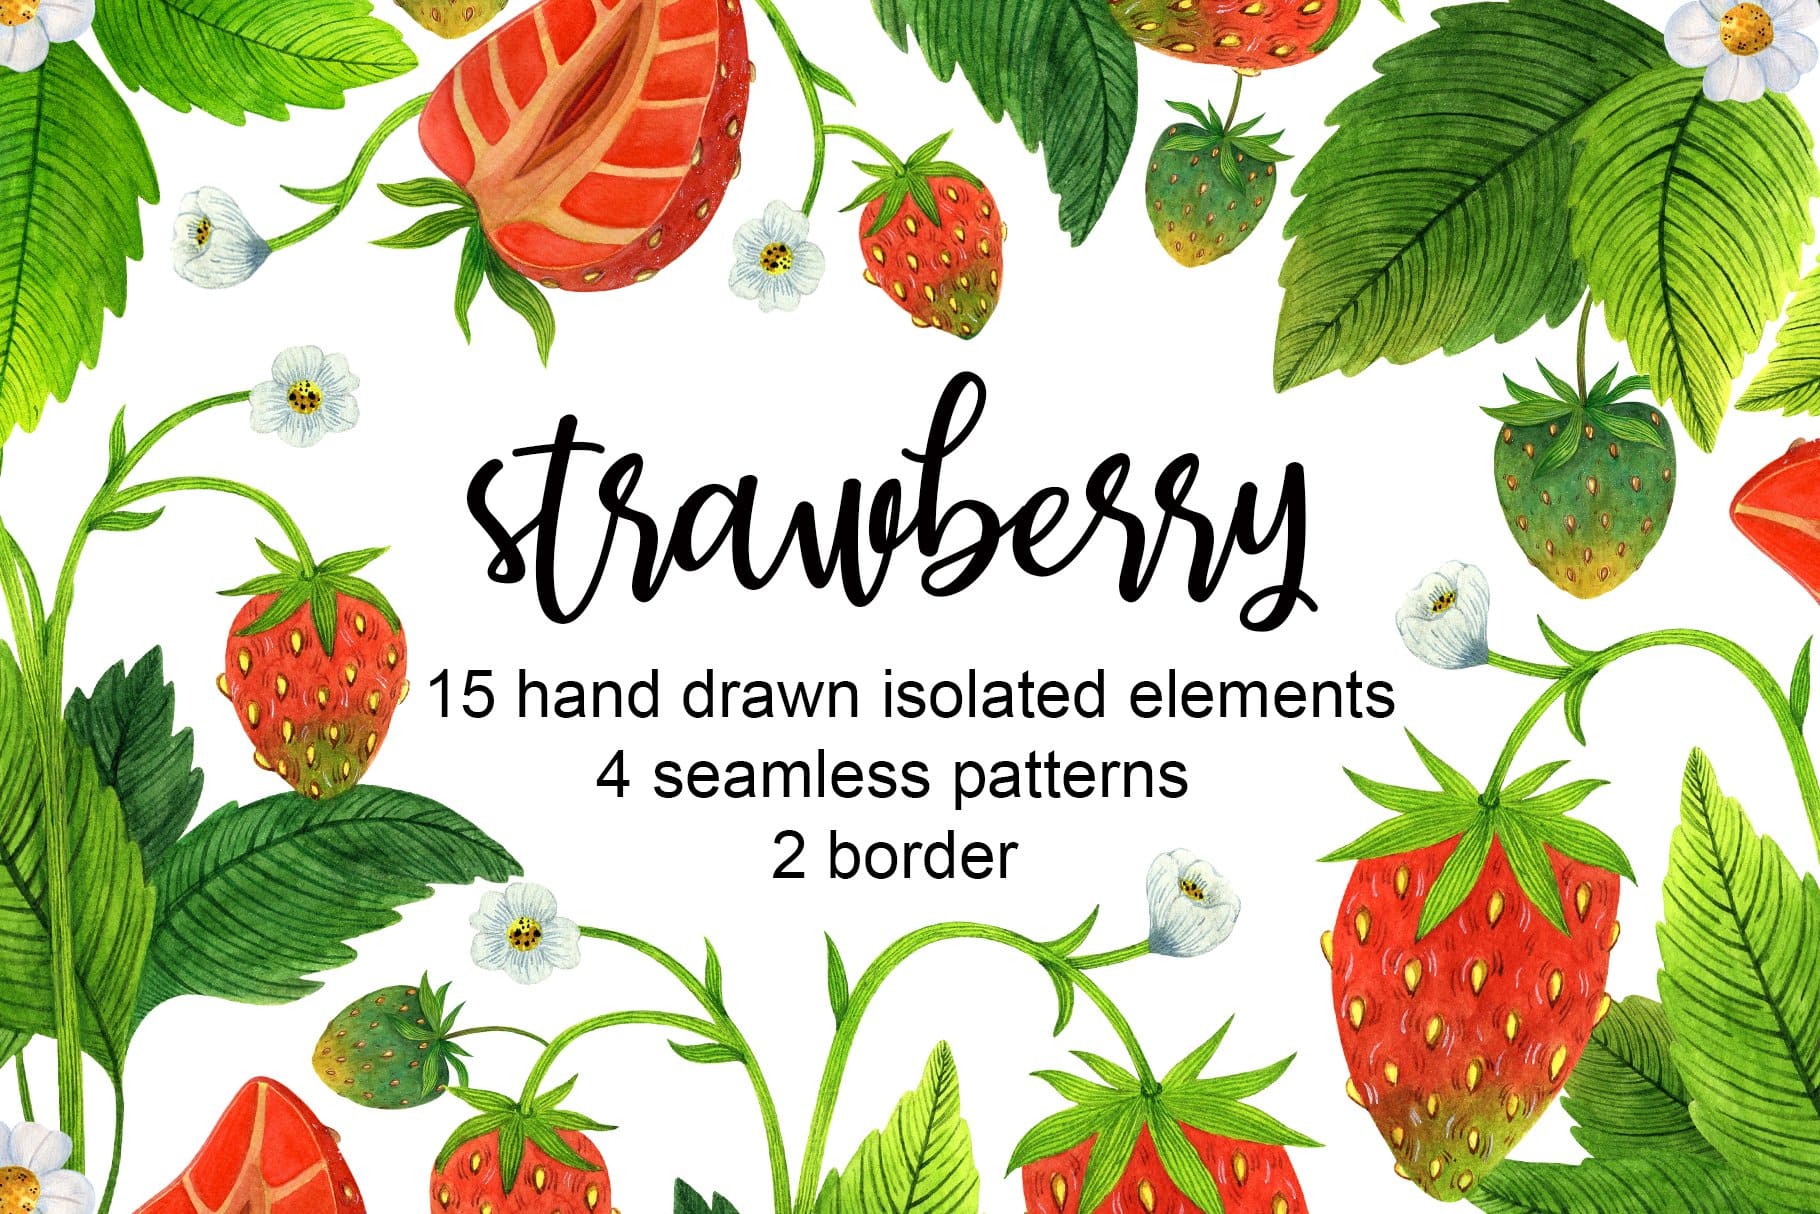 Summer strawberries drawn on a white background.